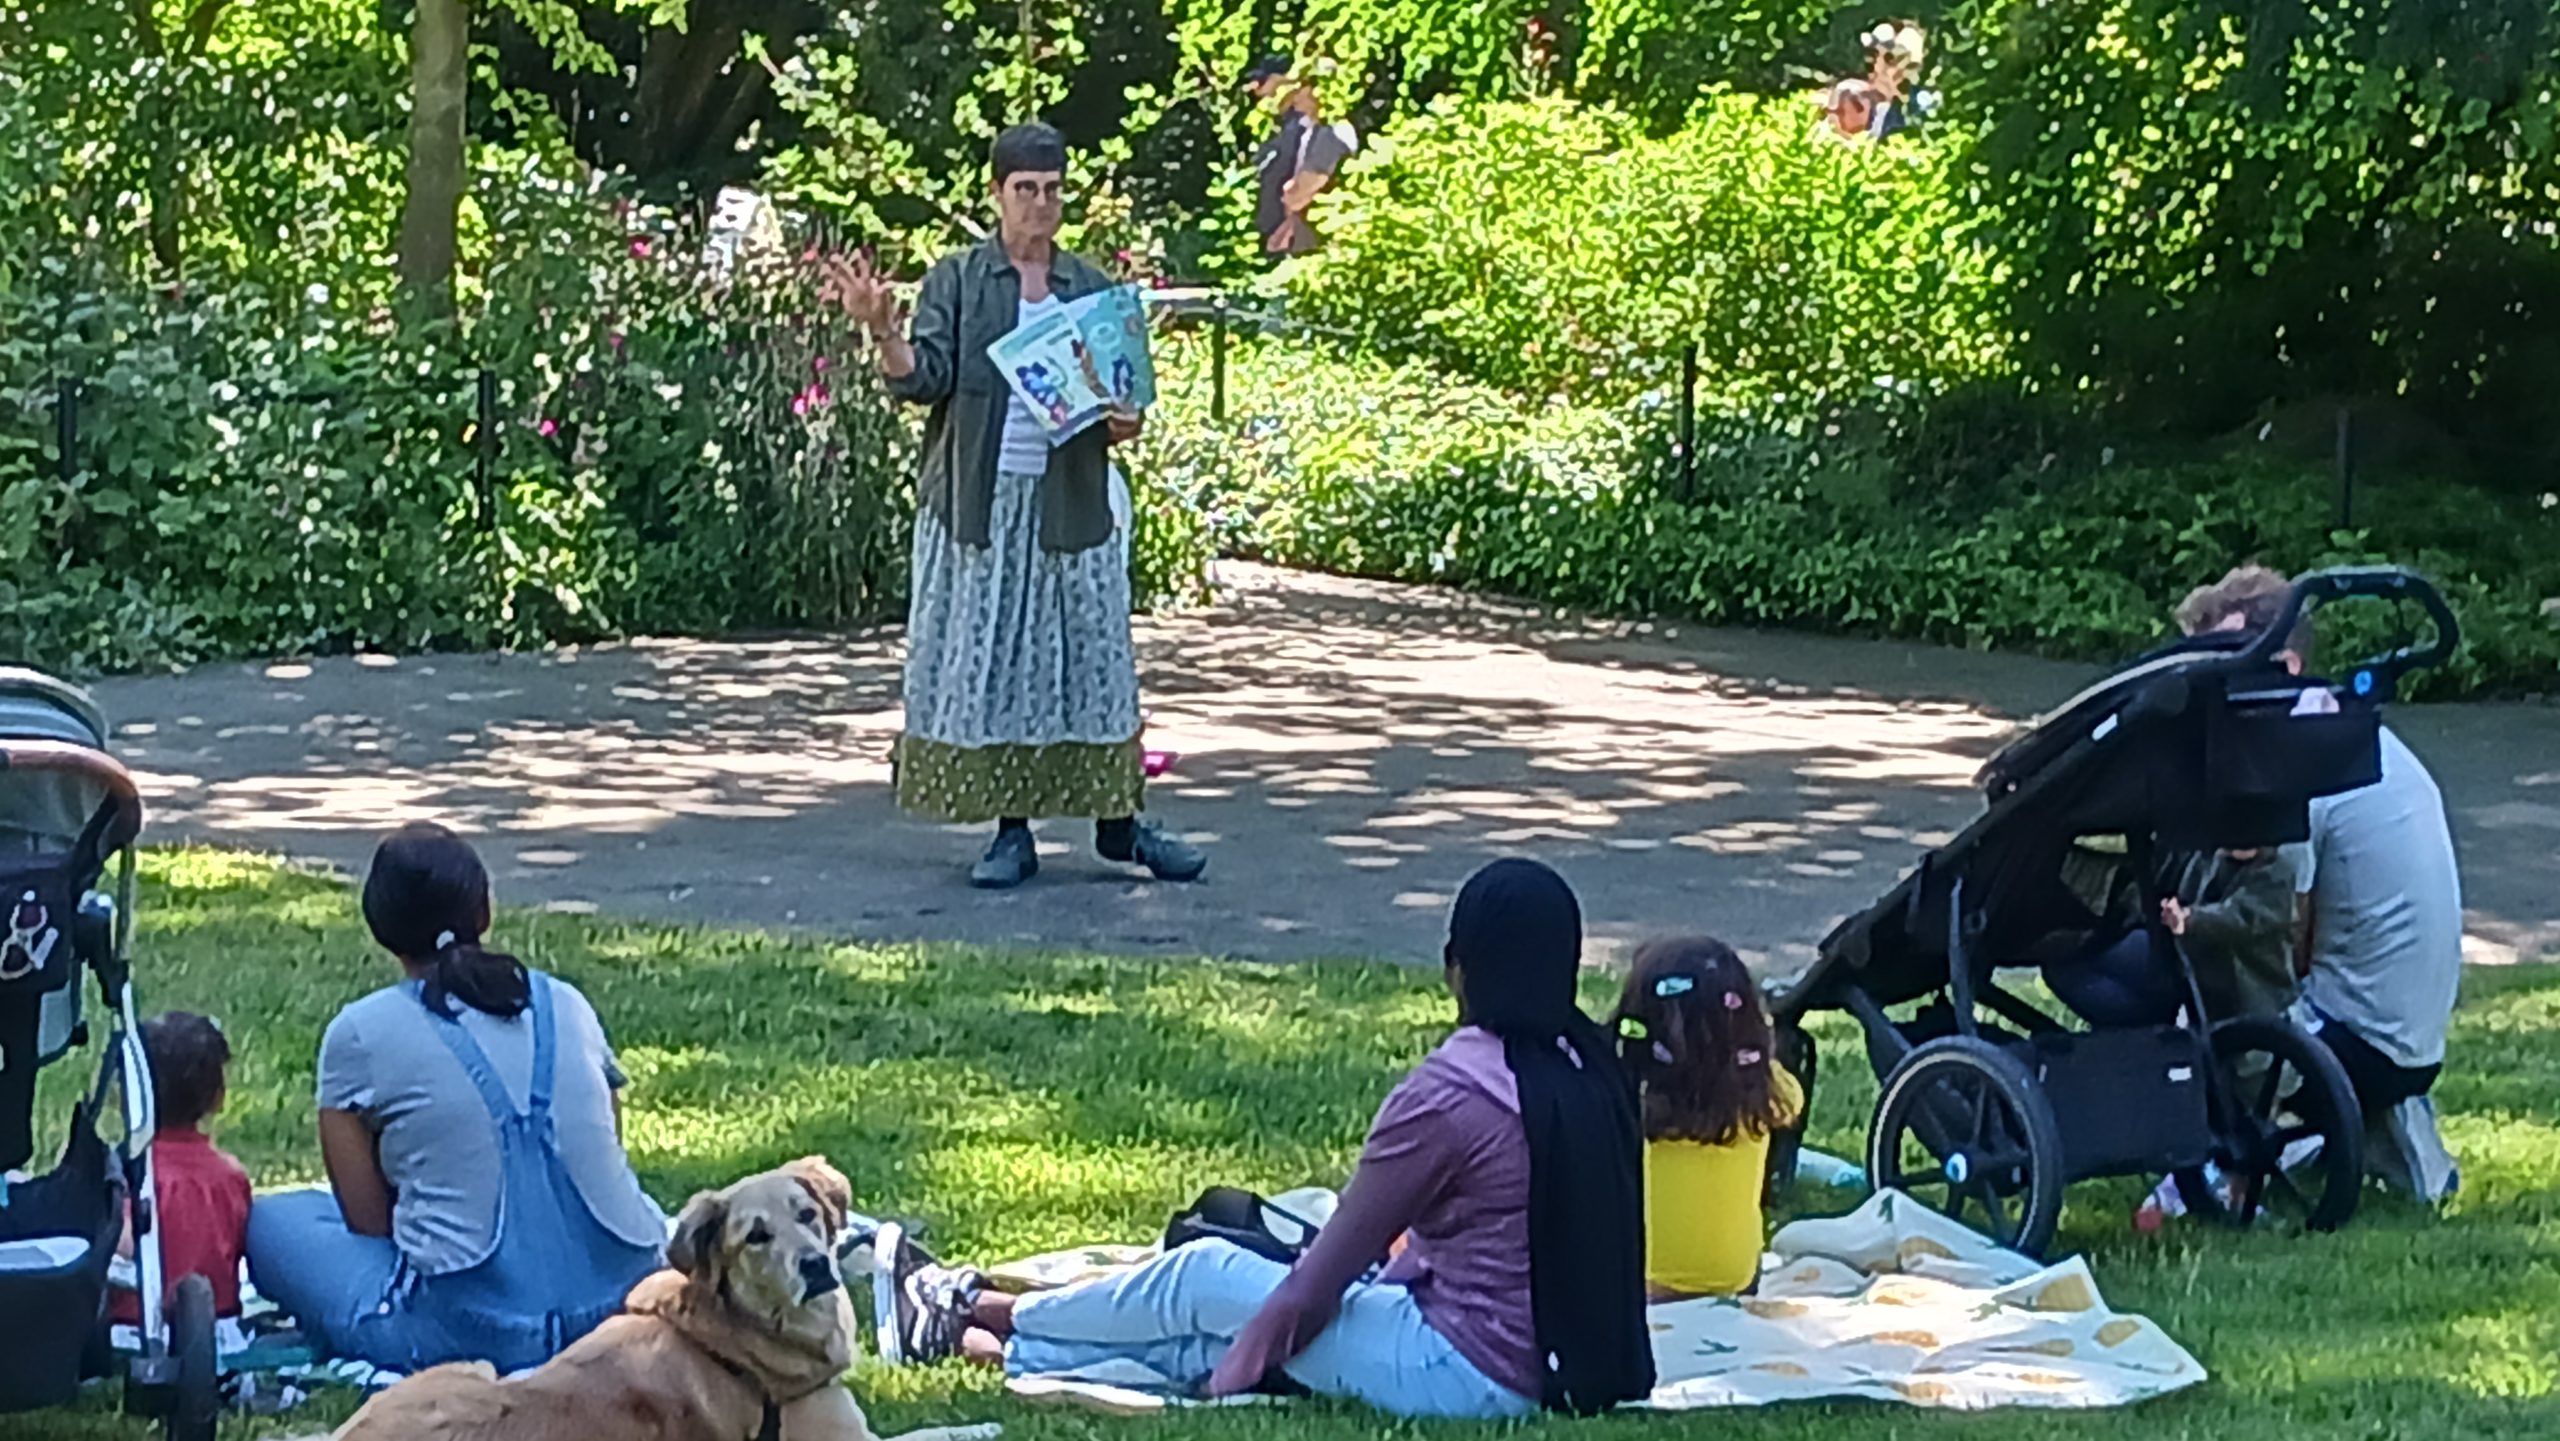 Join Page Ahead at the Ballard Locks for summer story times!